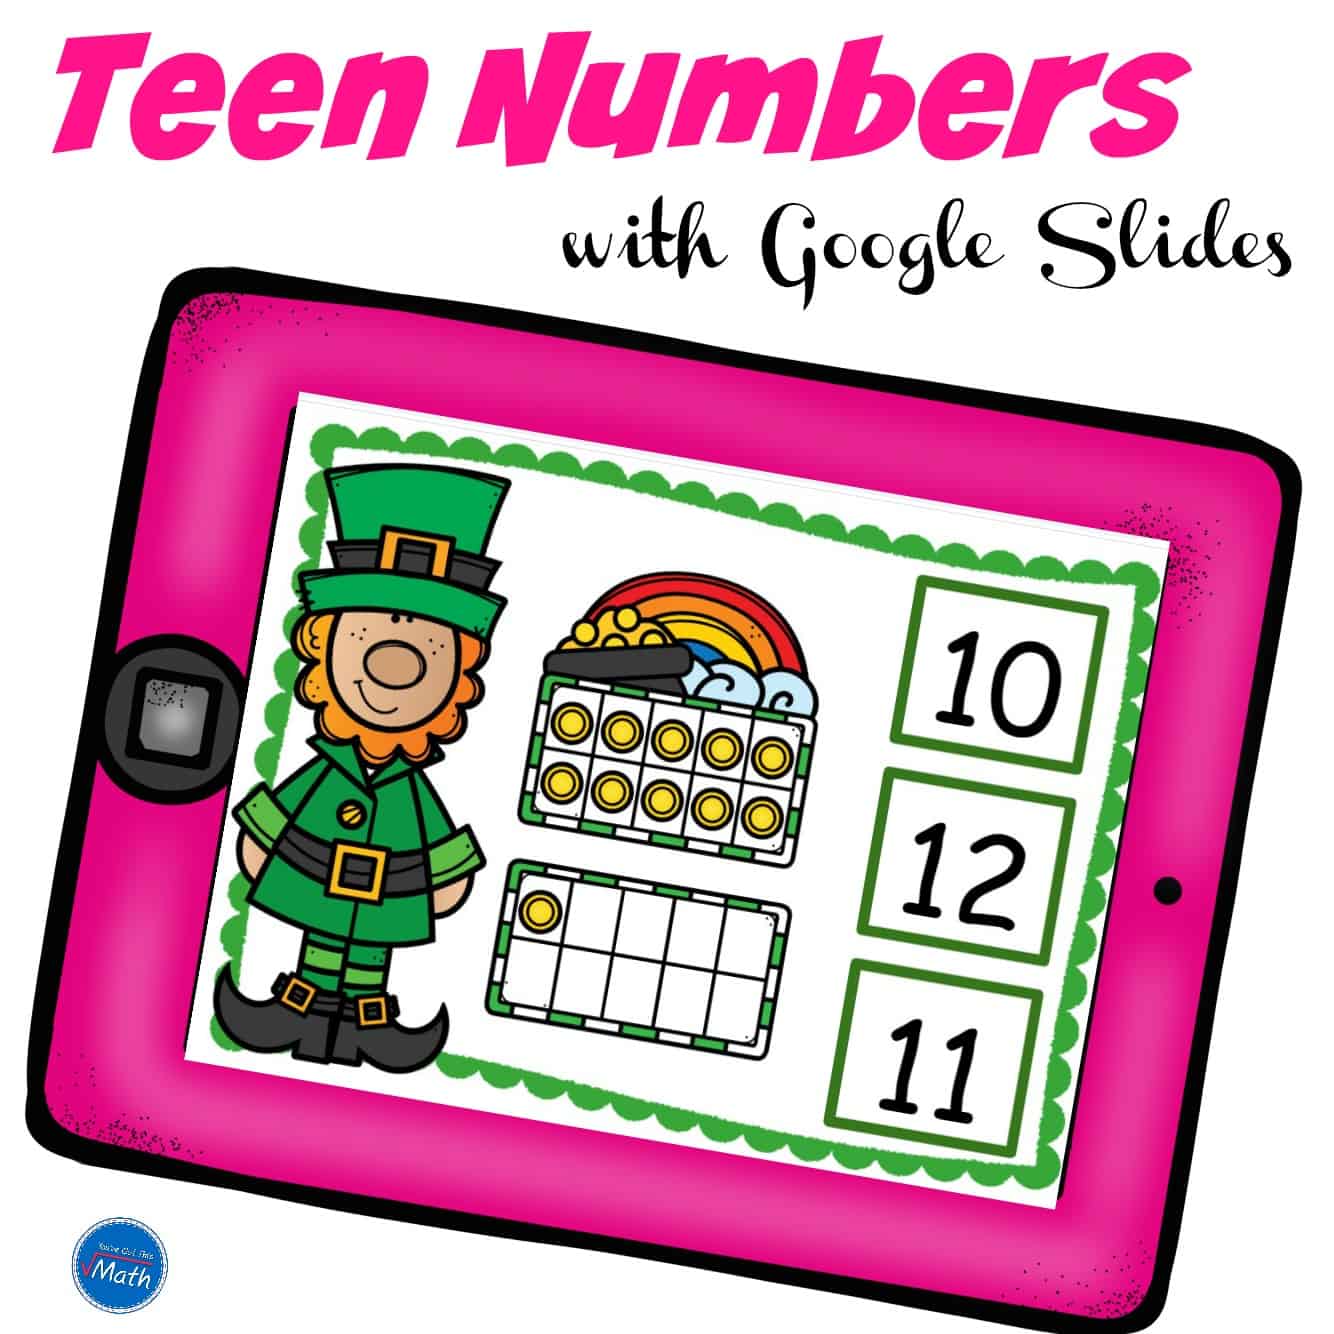 FREE St. Patrick’s Day Teen Number Activity (Google Slides)